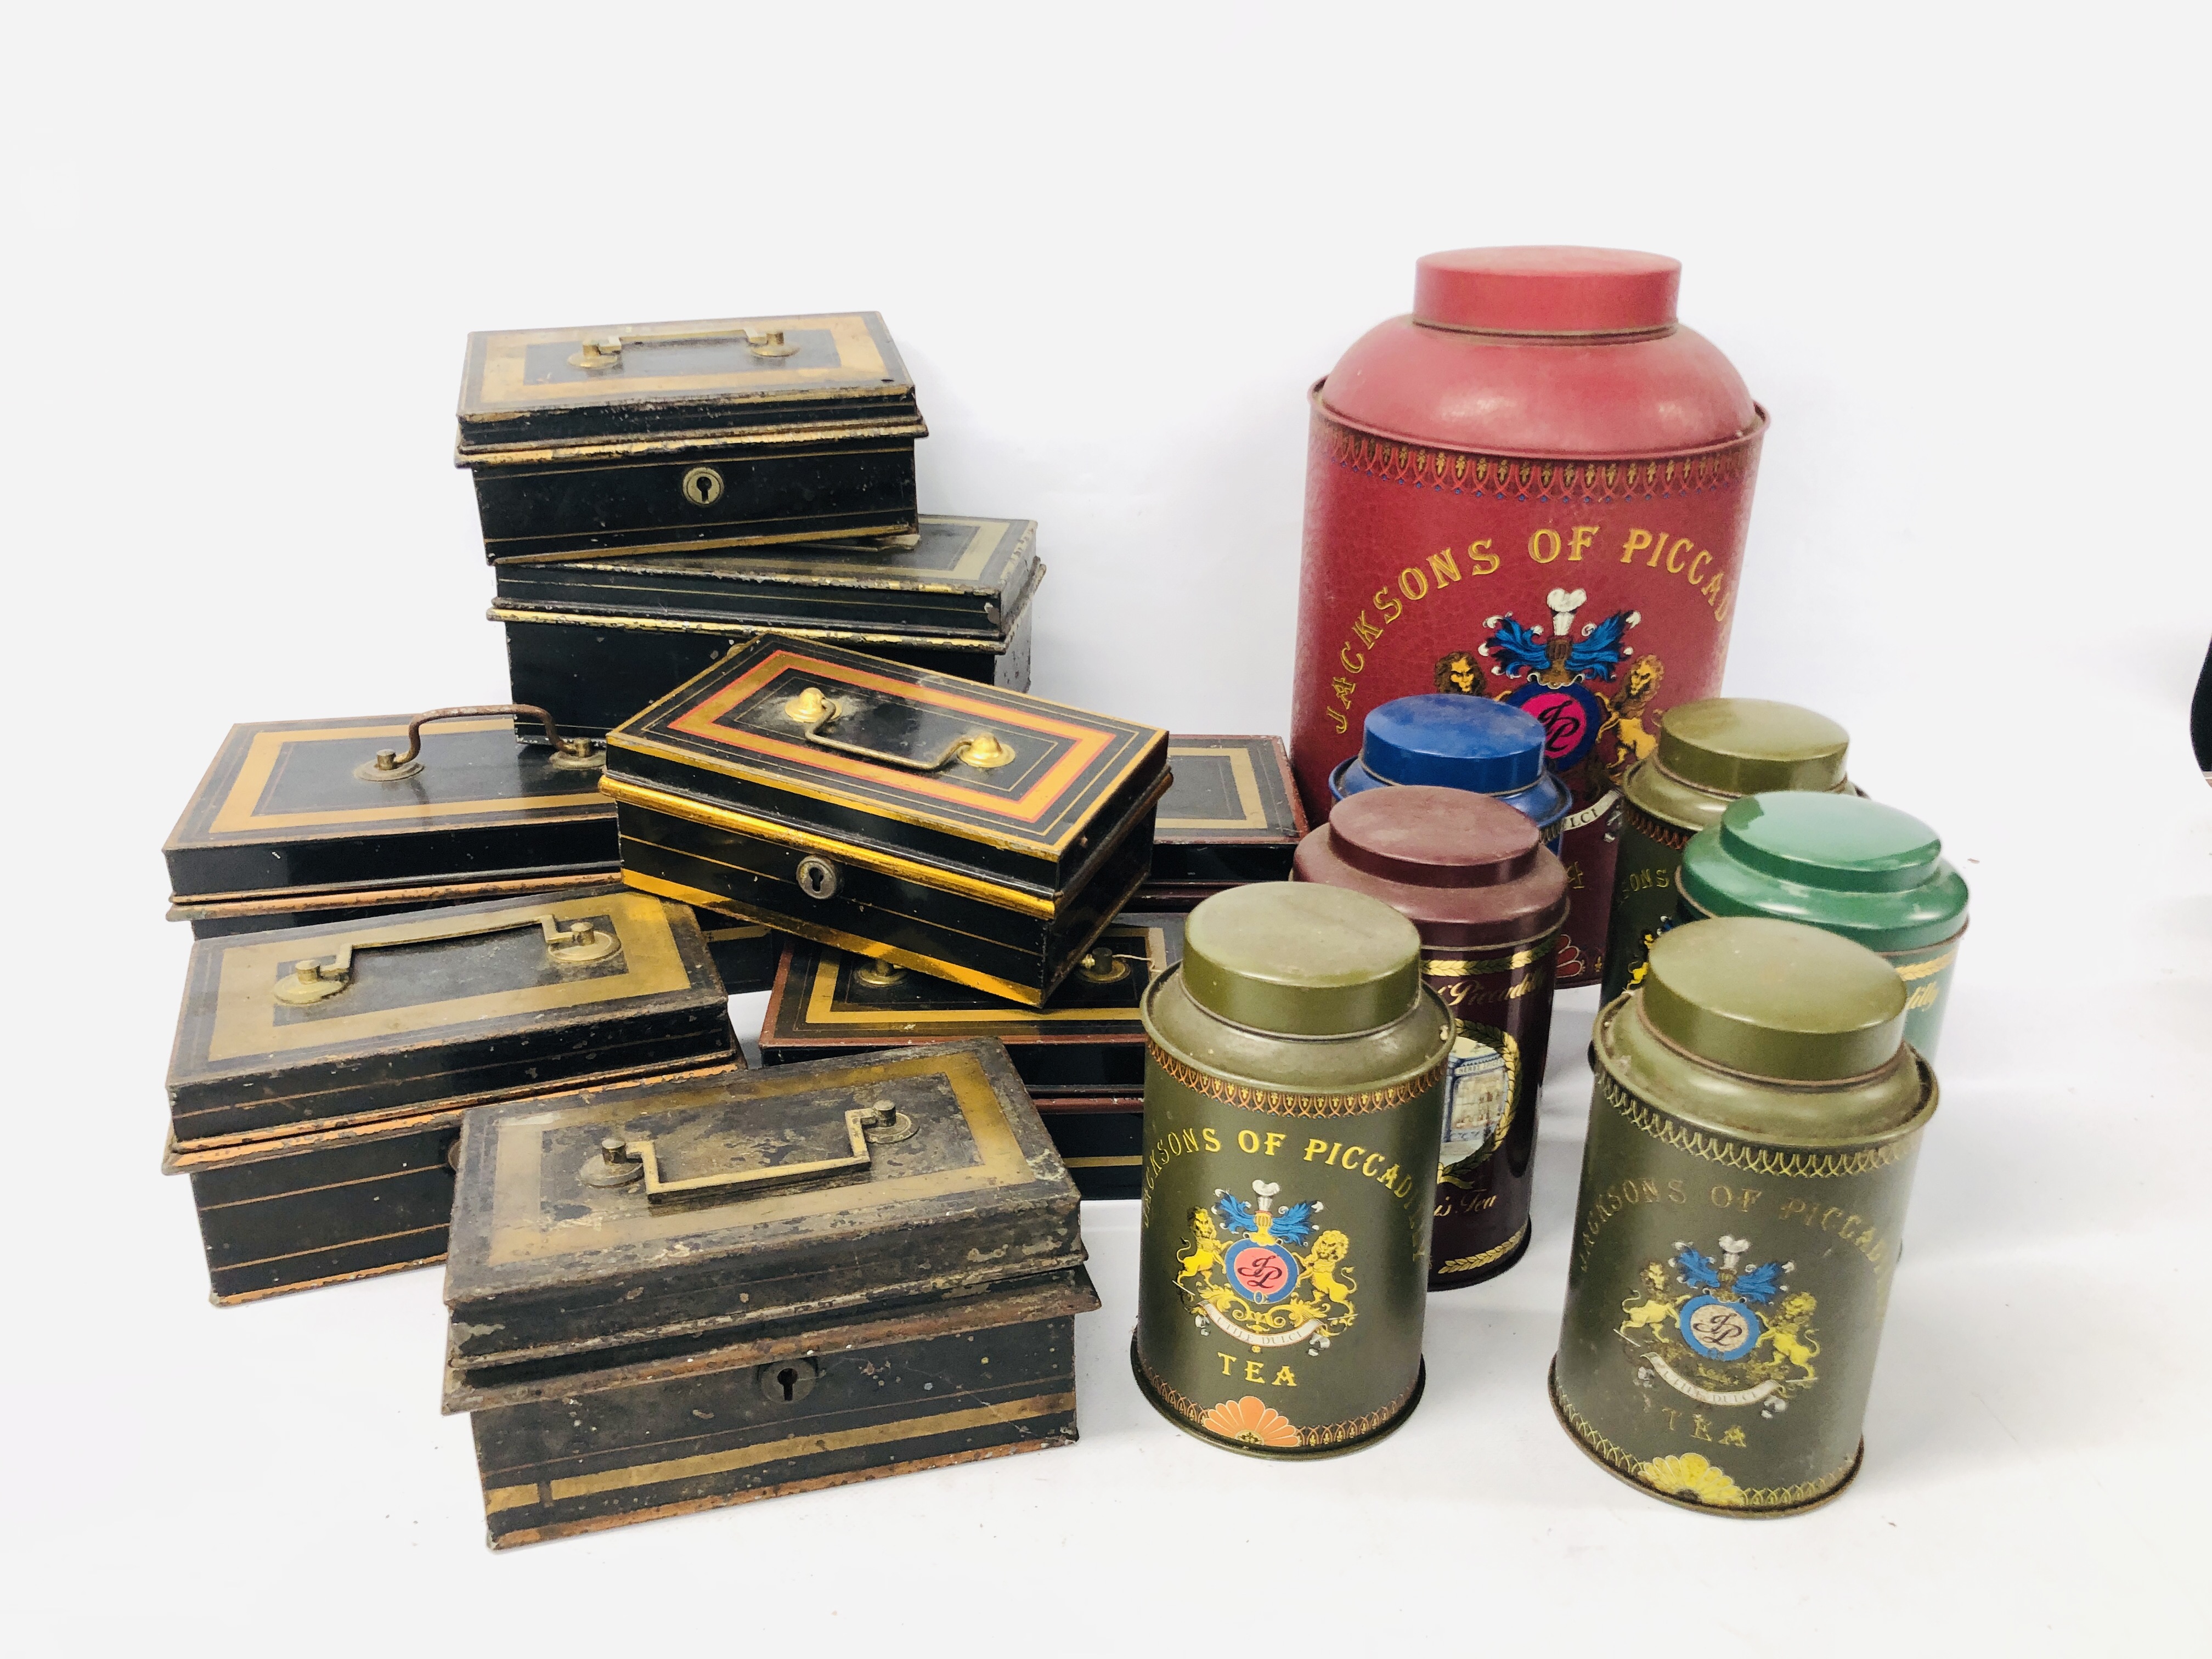 7 JACKSONS OF PICCADILLY TEA TINS ALONG WITH 8 VINTAGE BLACK AND GOLD TONE CASH TINS